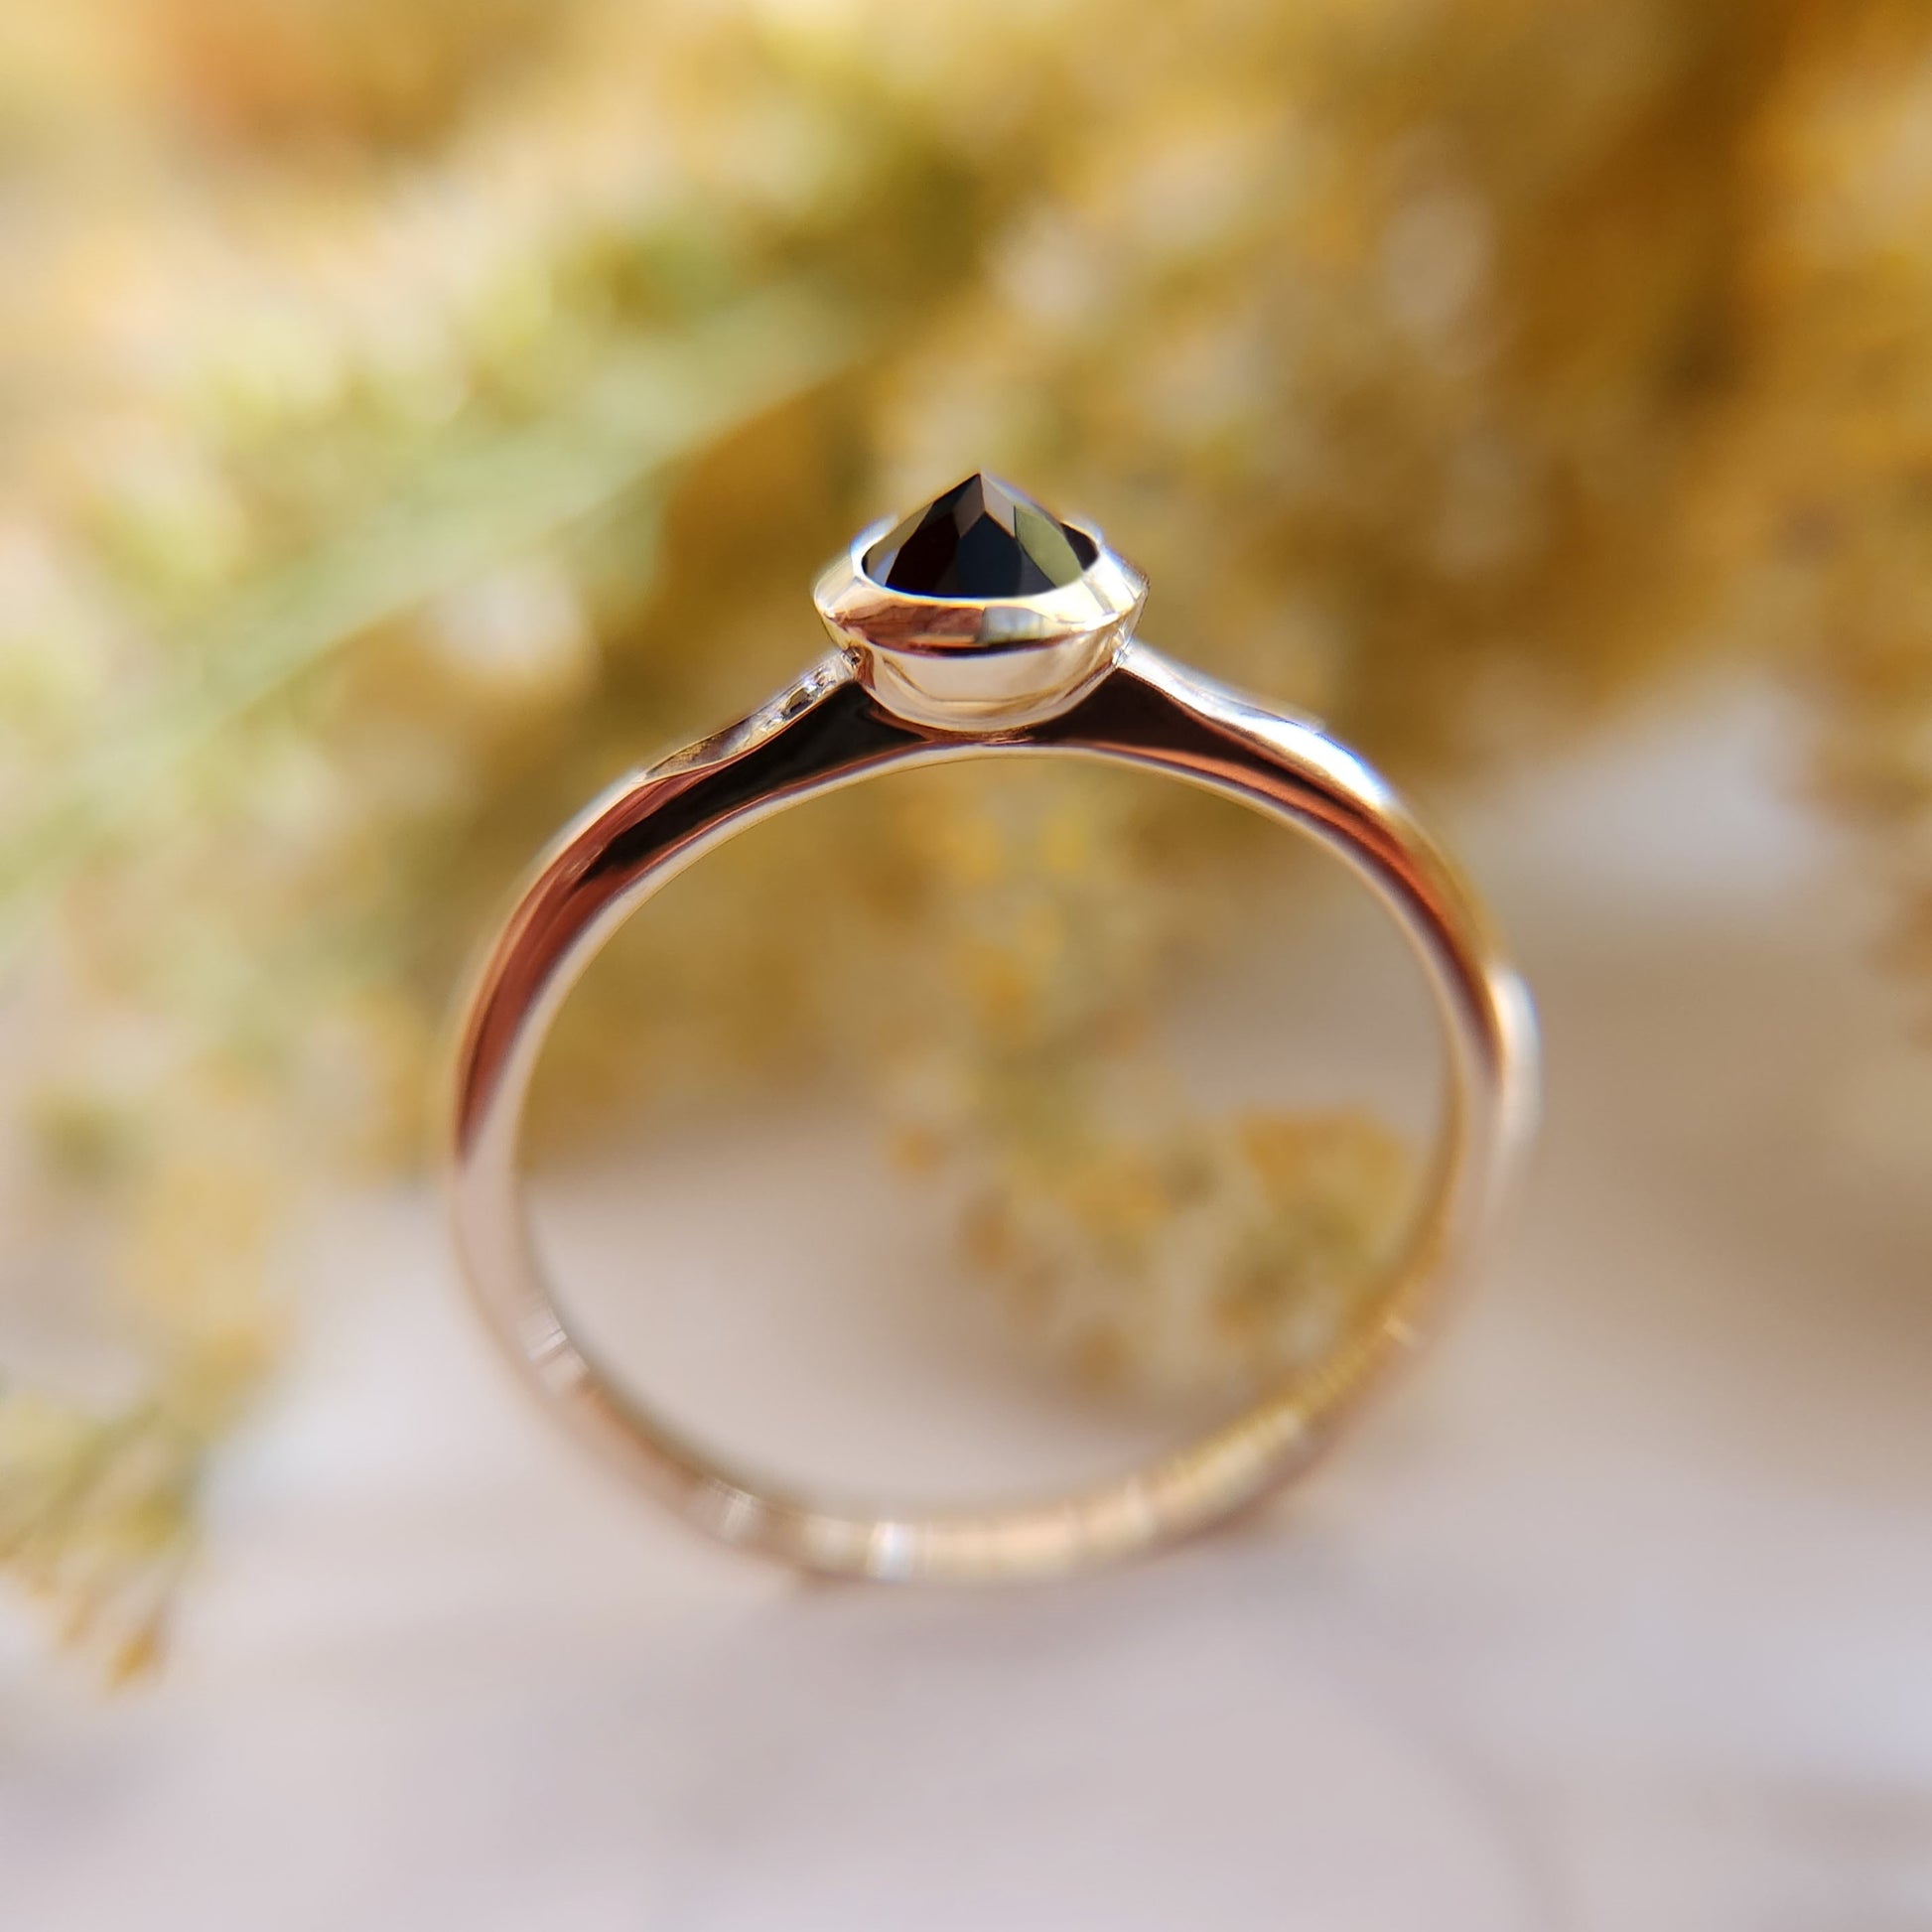 Upside-down Stone Ring